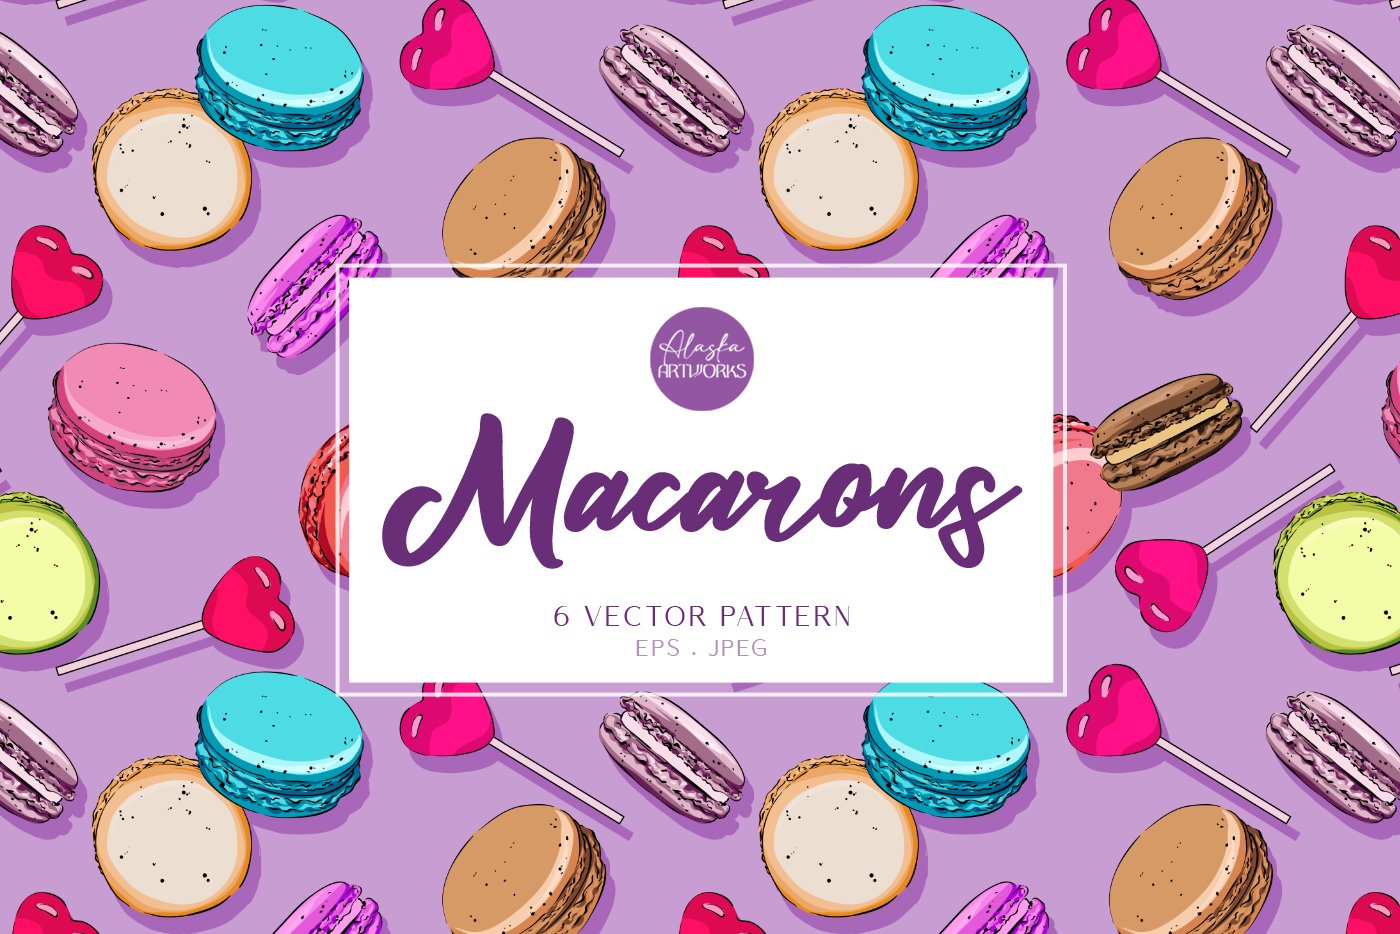 Vector patterns. Macaron, sweets cover image.